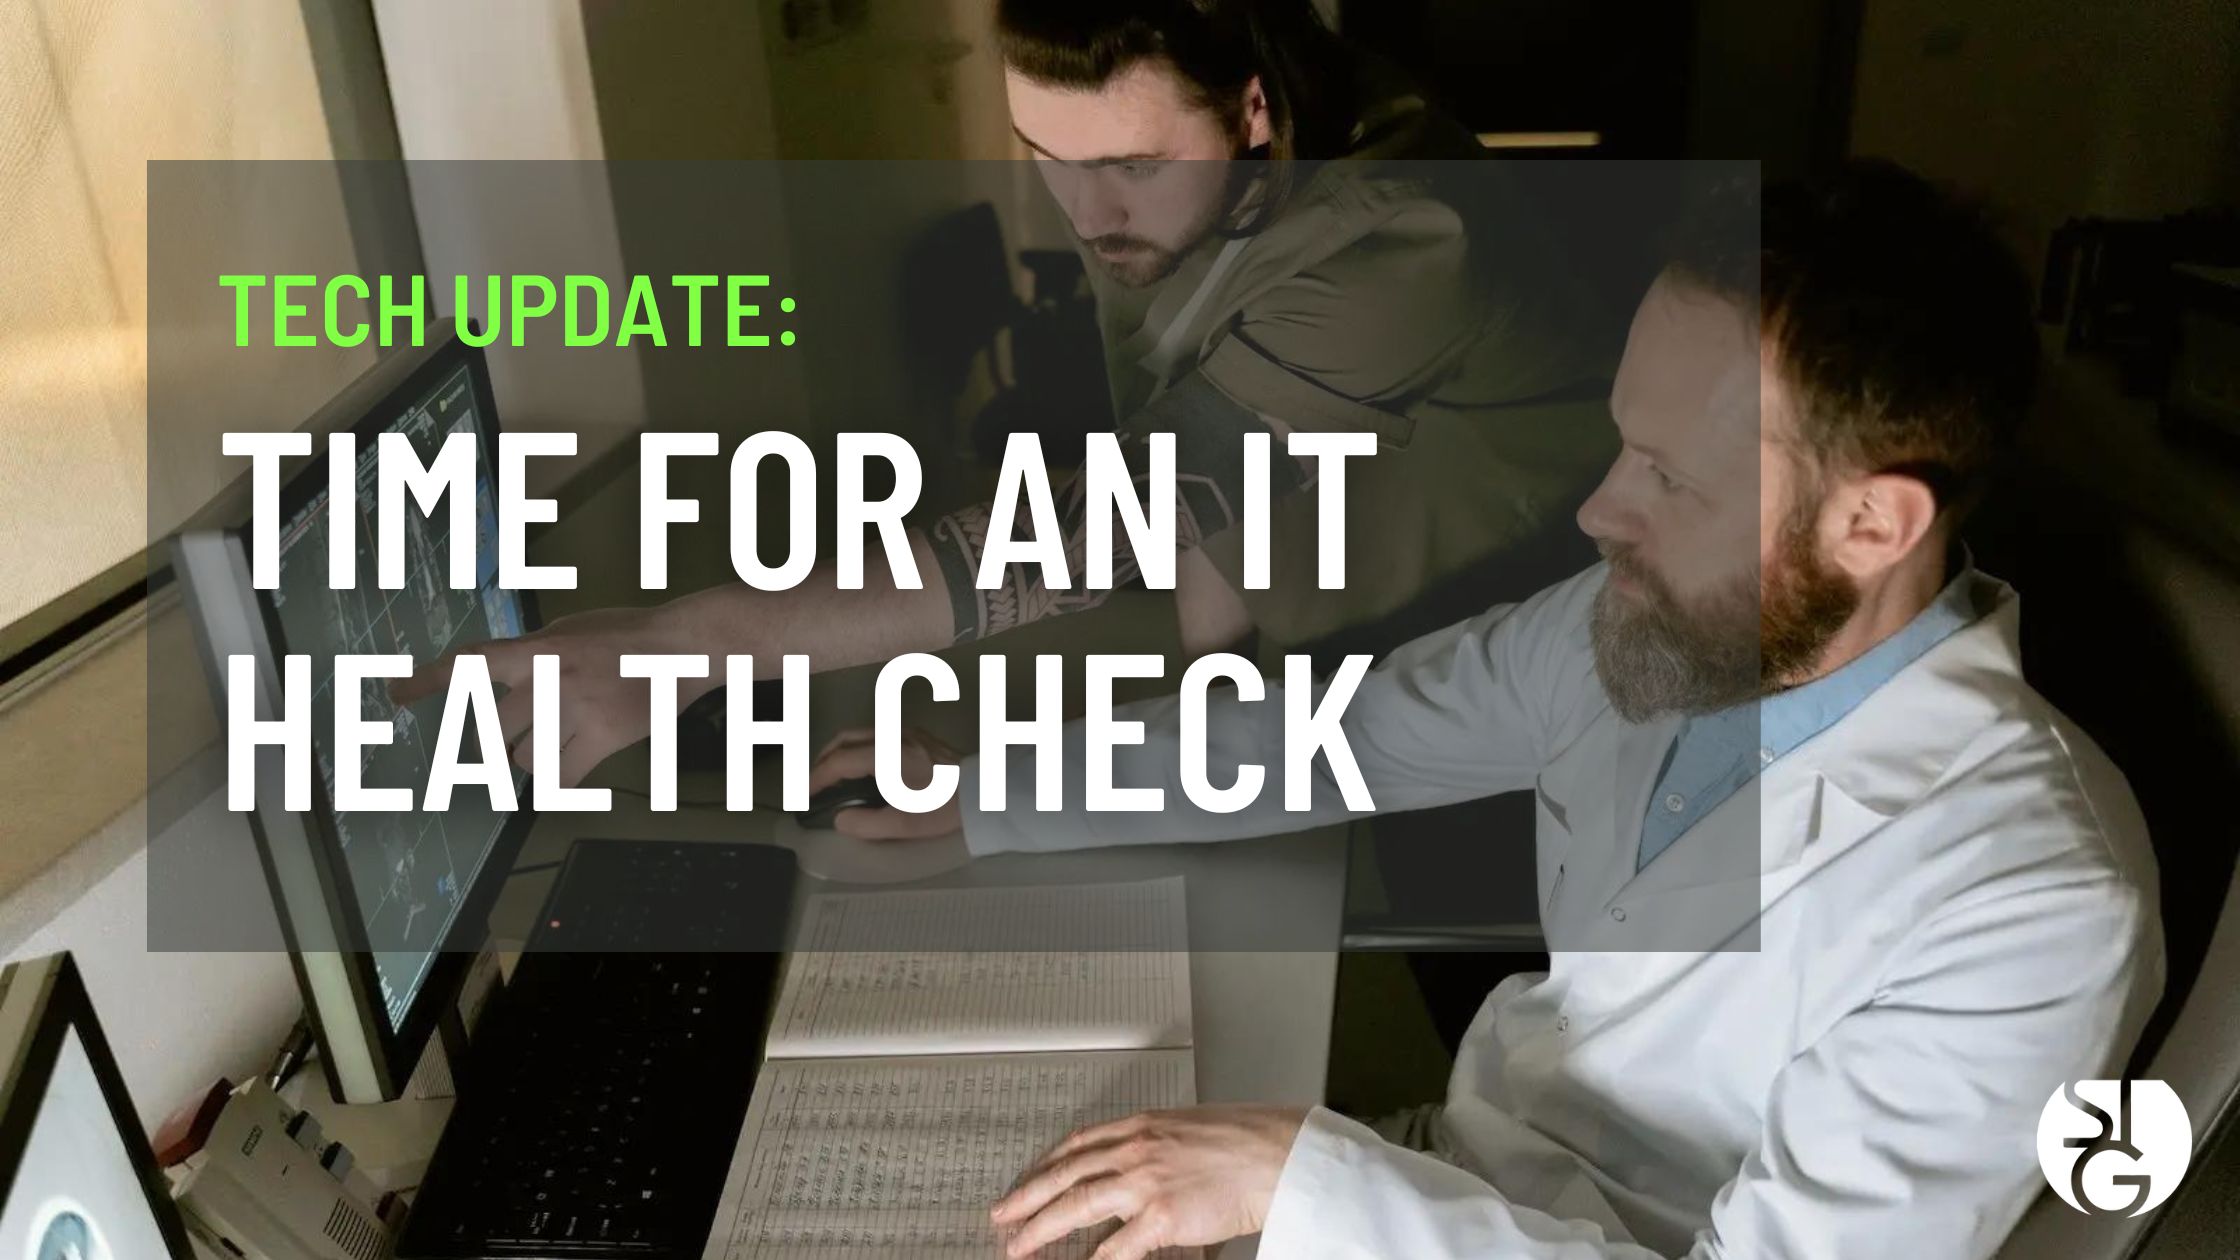 When was the Last Time you had an IT Health Check?